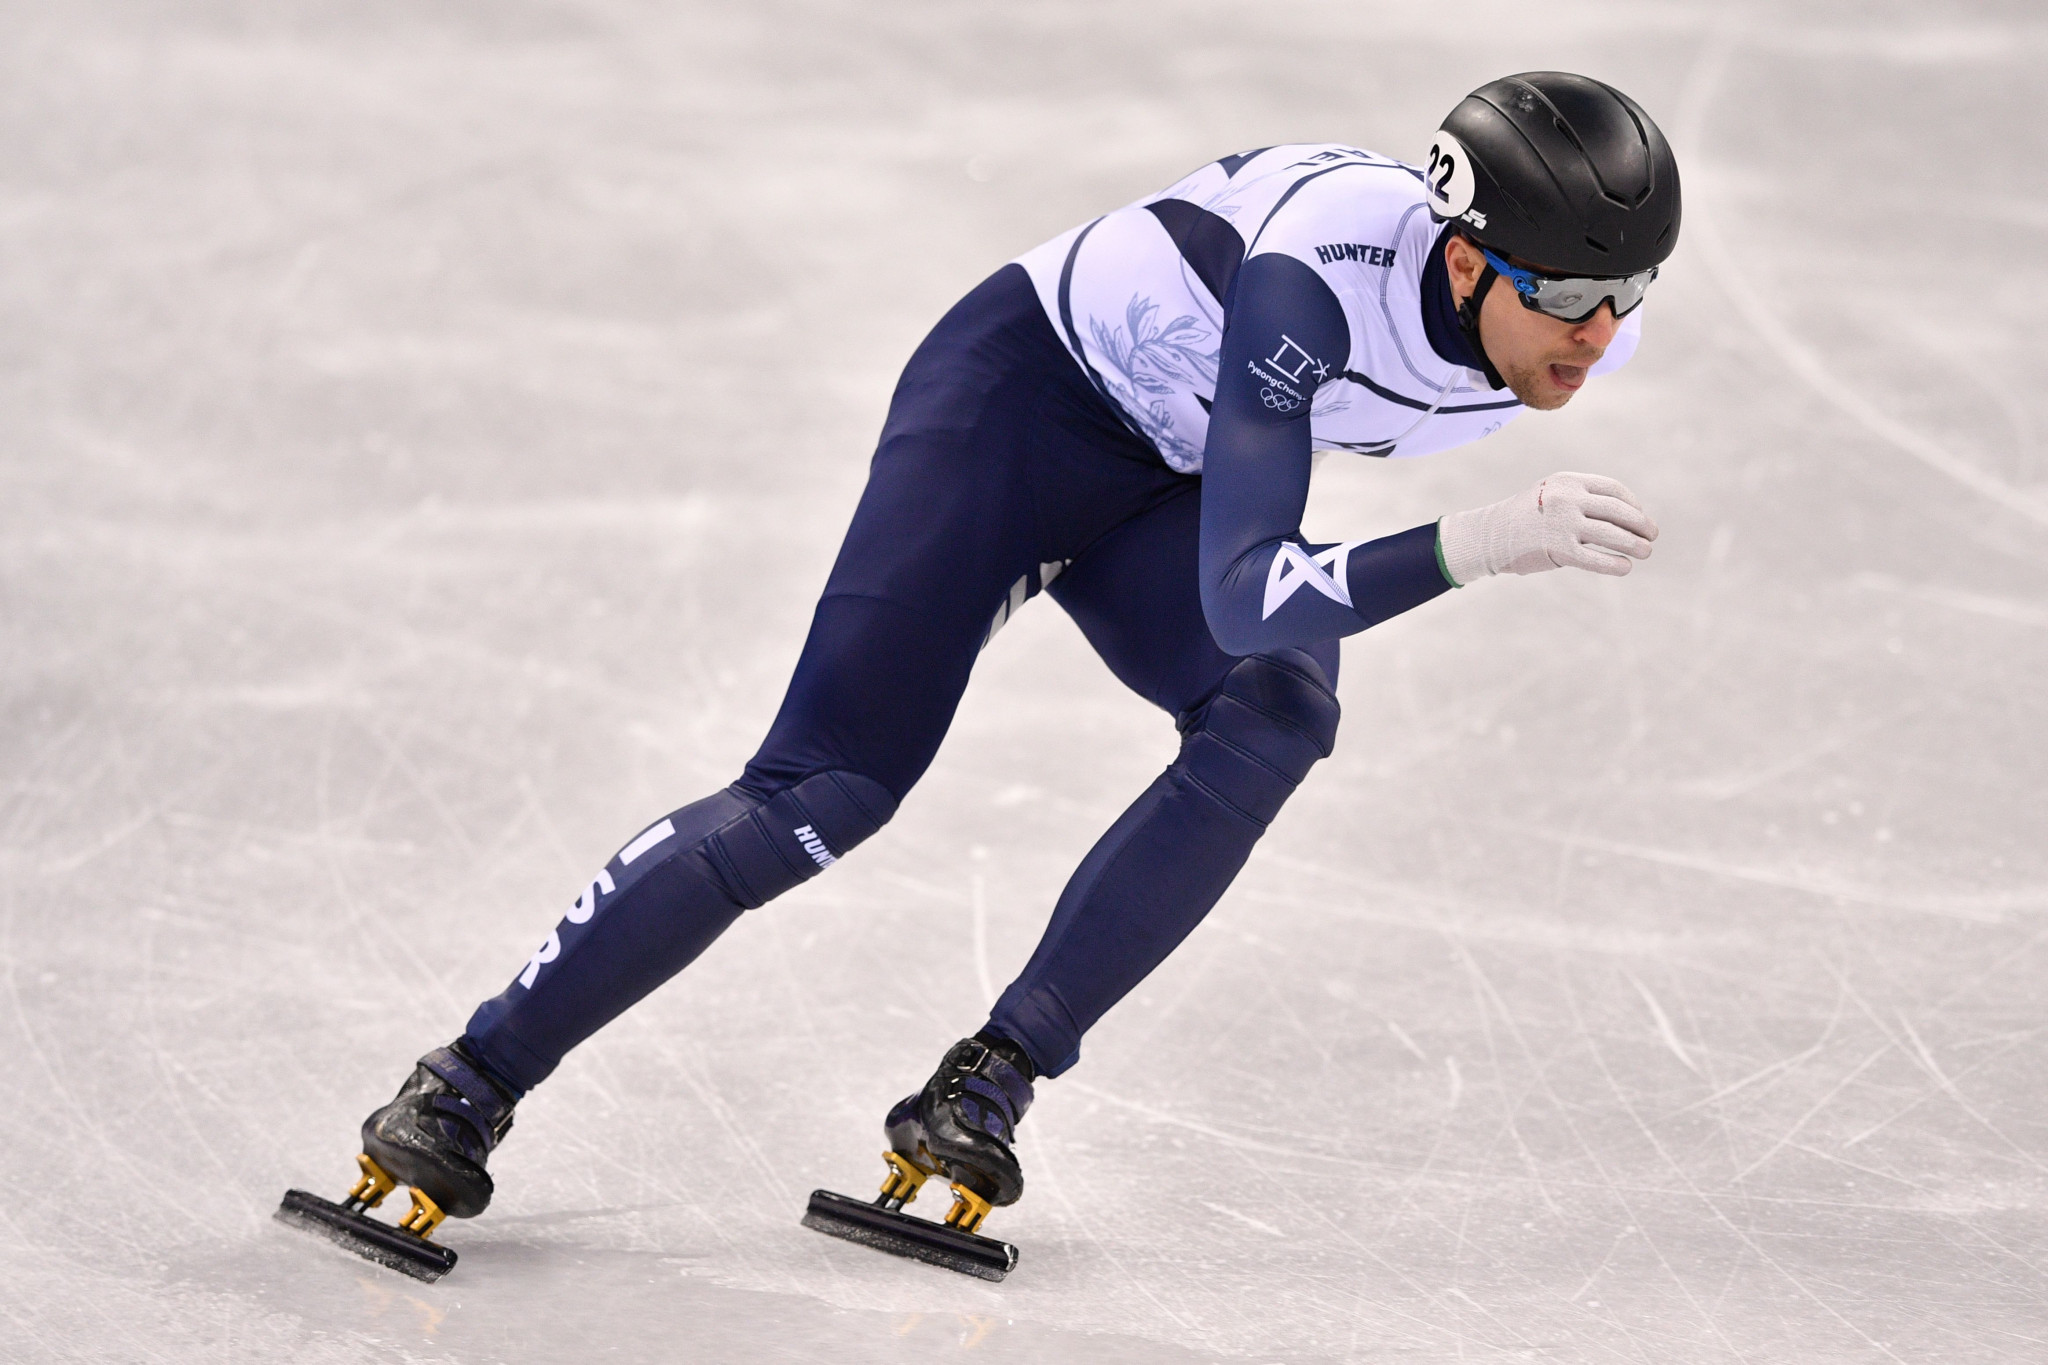 Israel’s Vladislav Bykanov was the fastest qualifier in the men's 1,000m and 1,500m event on the first day of the ISU European Short Track Speed Skating Championships ©Getty Images